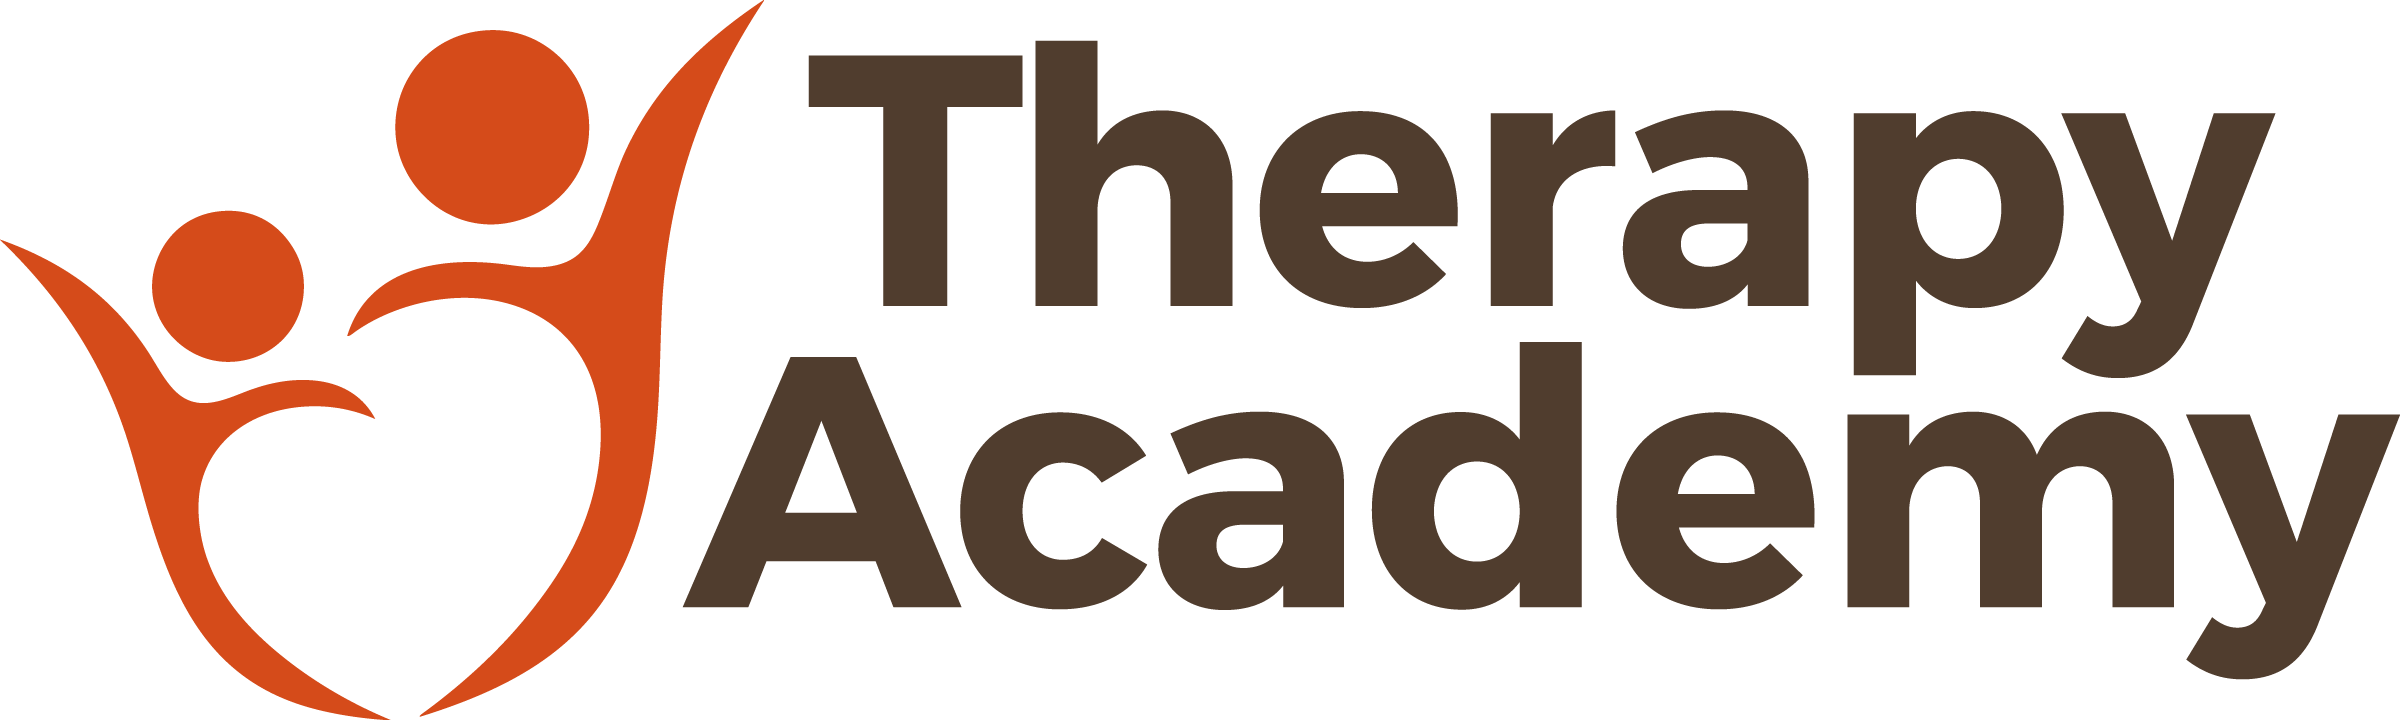 Therapy Academy logo. Luke Radney Disability insurance claims, Social Security insurance claims Attorney, Dallas Fort Worth area